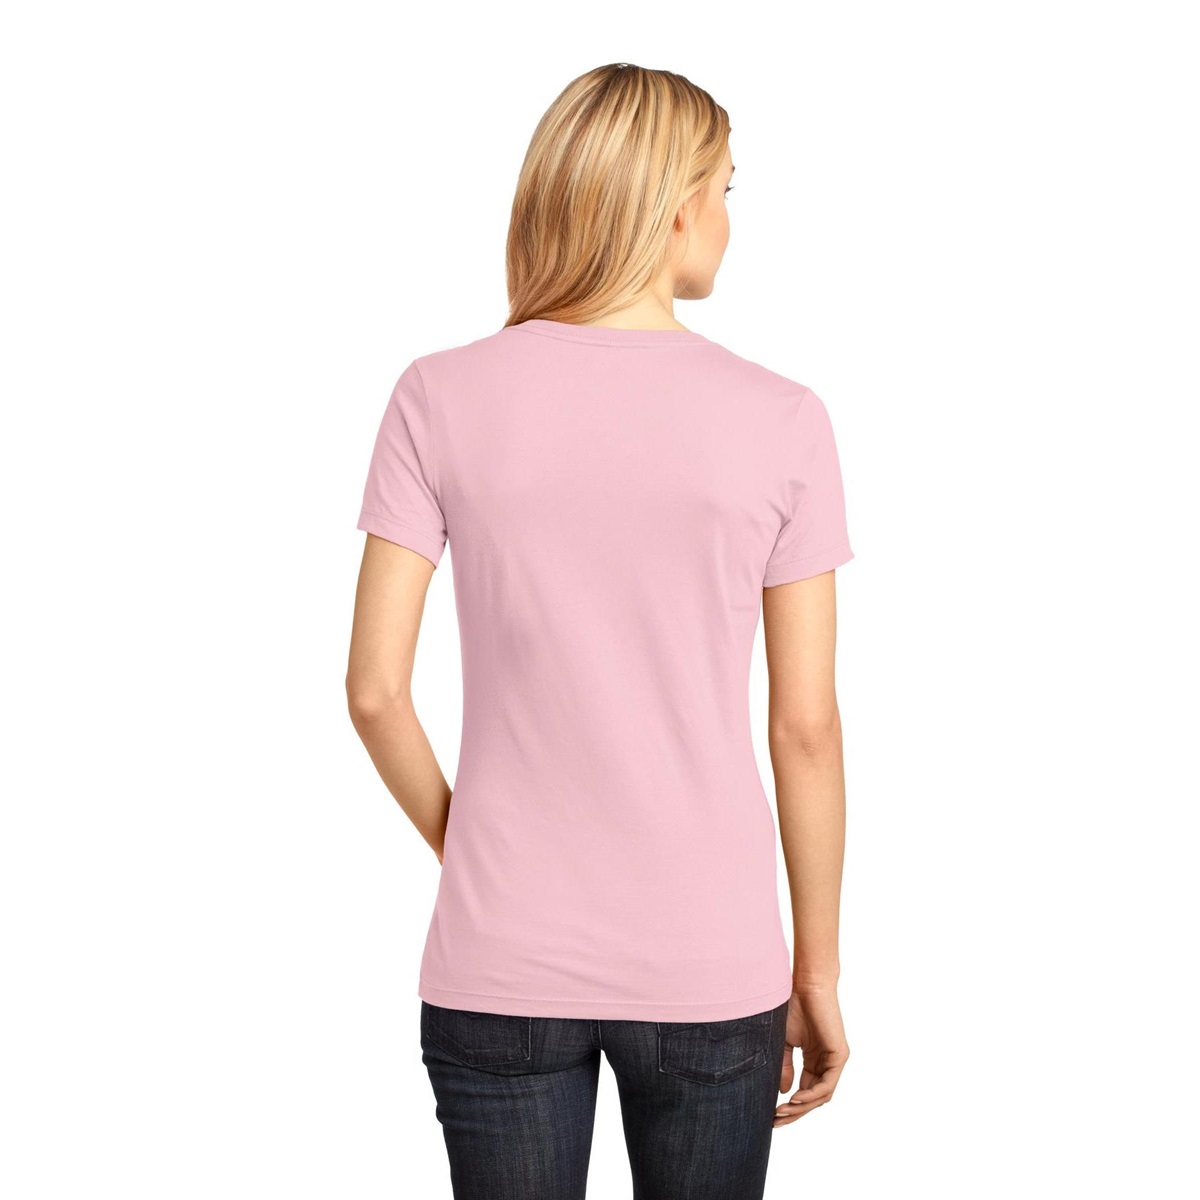 District Made DM1170L Ladies Perfect Weight V-Neck Tee - Light Pink ...